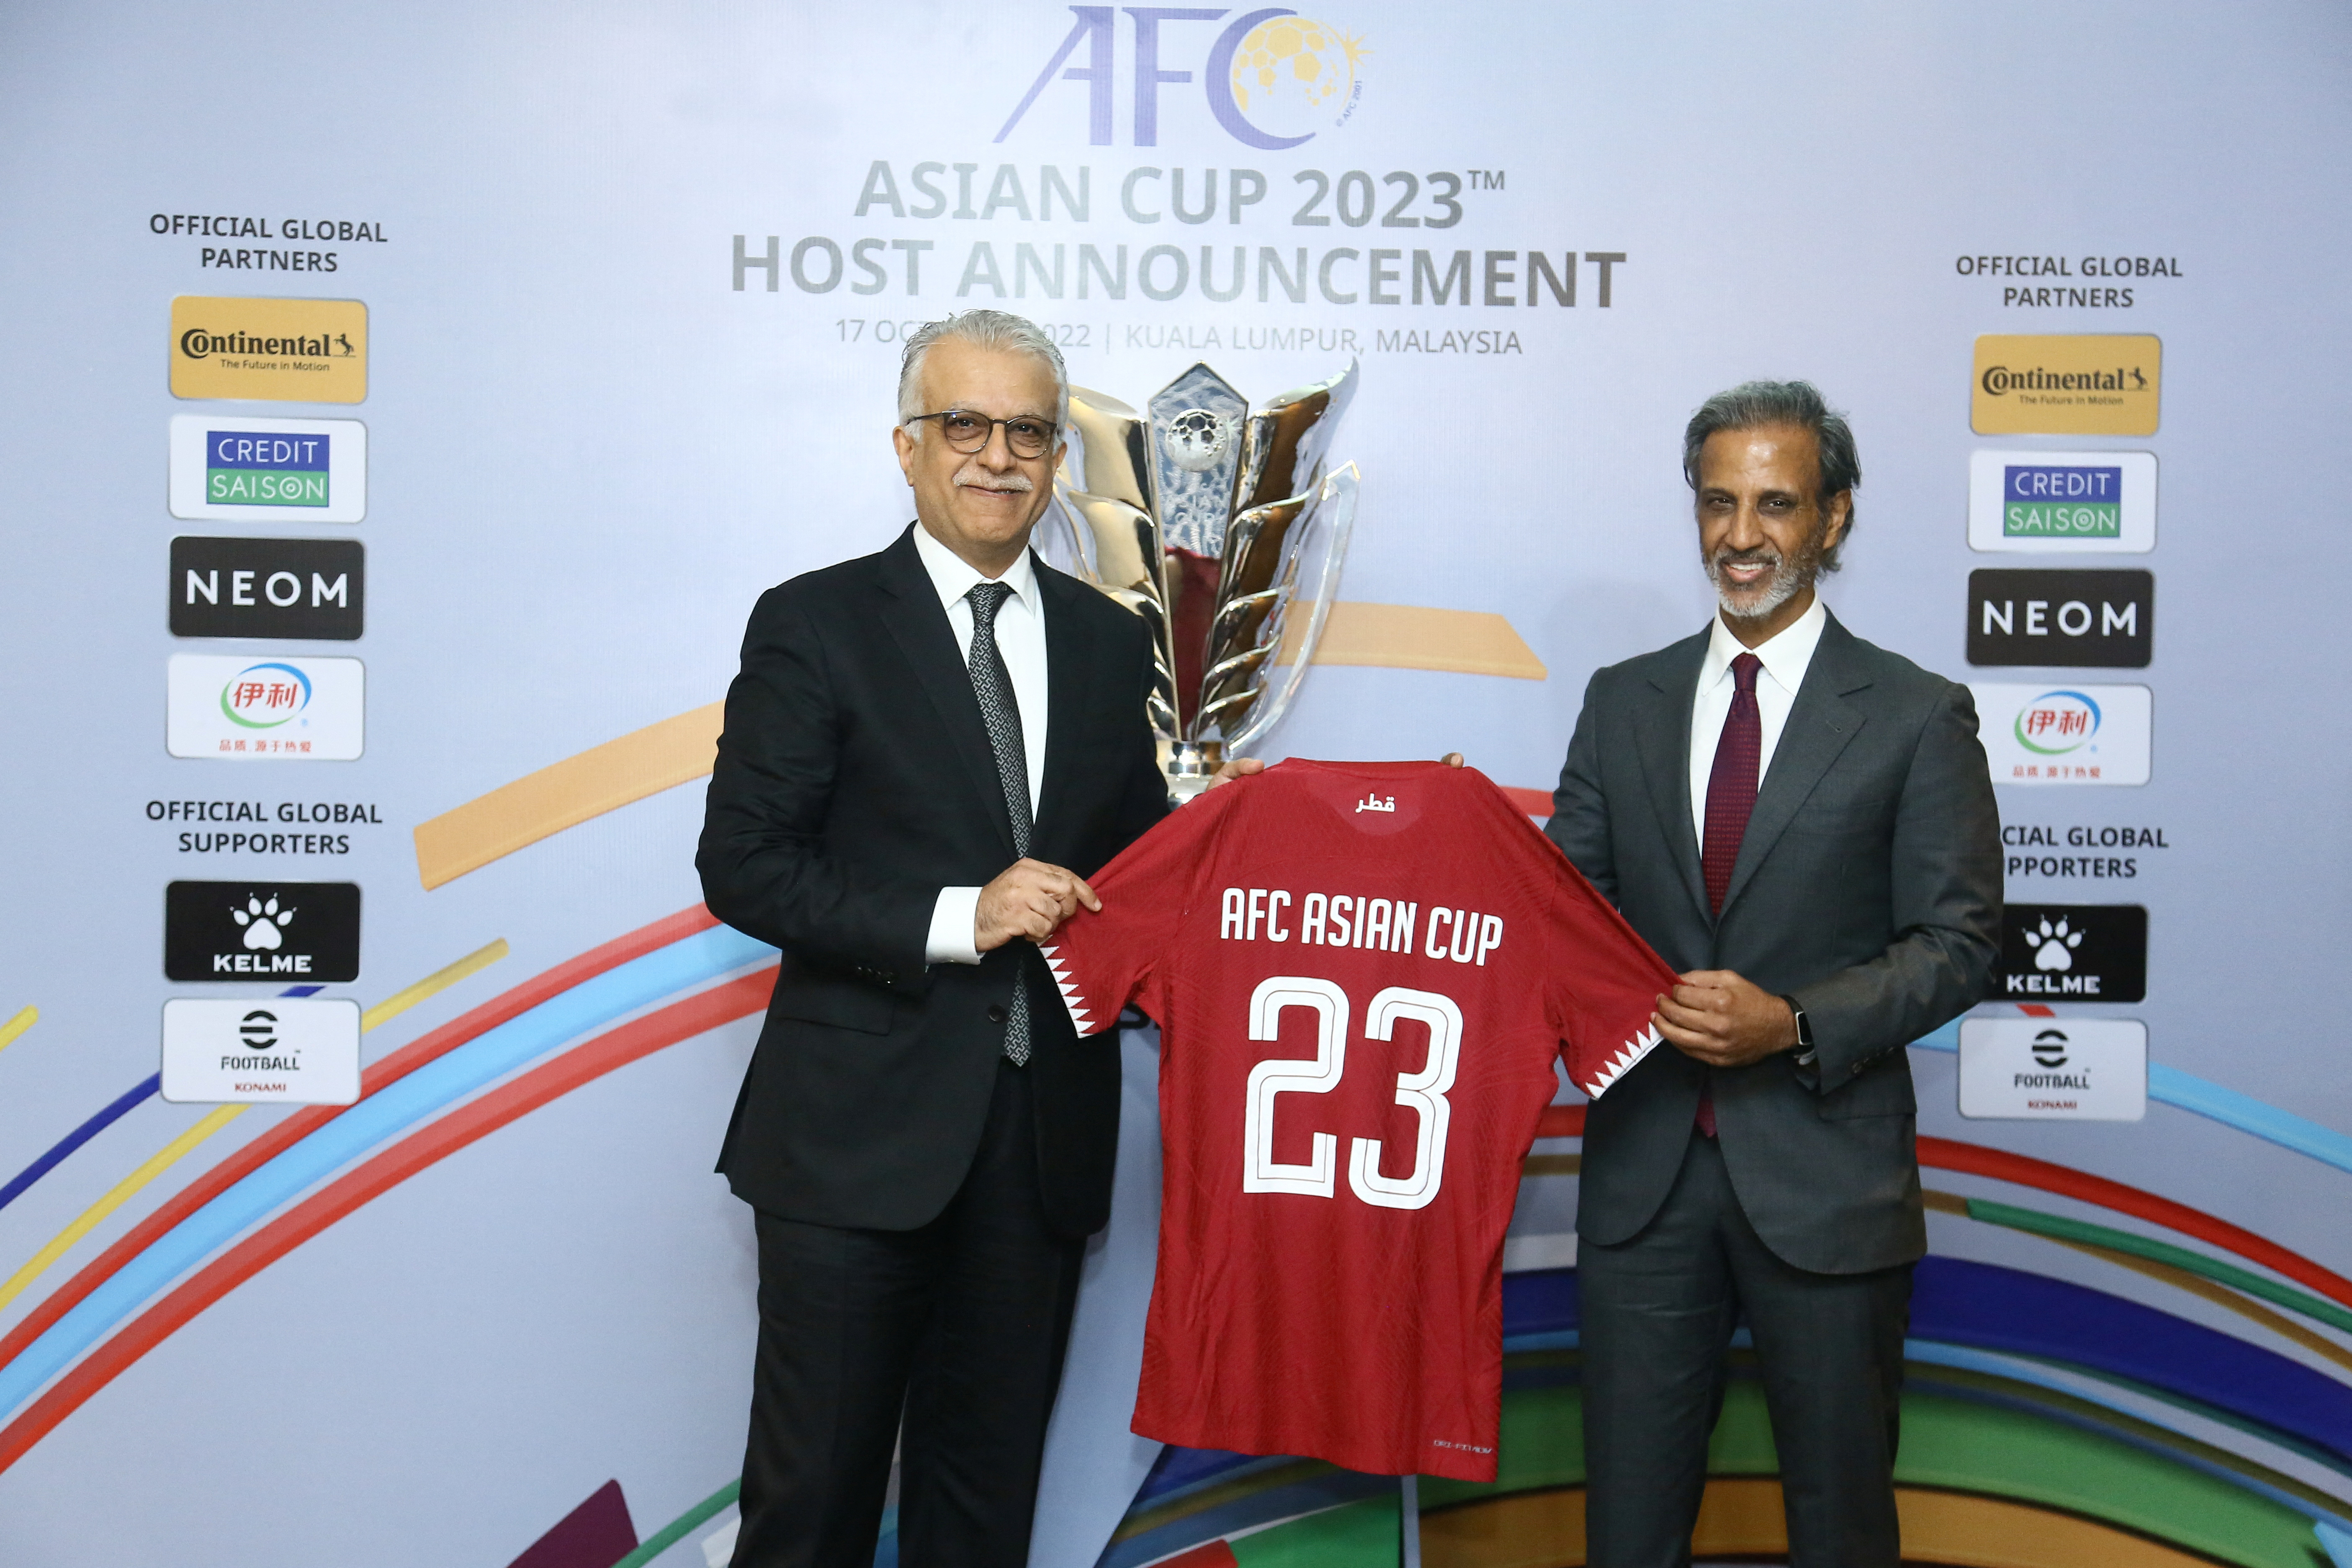 Qatar to stage 2023 Asian Cup after World Cup